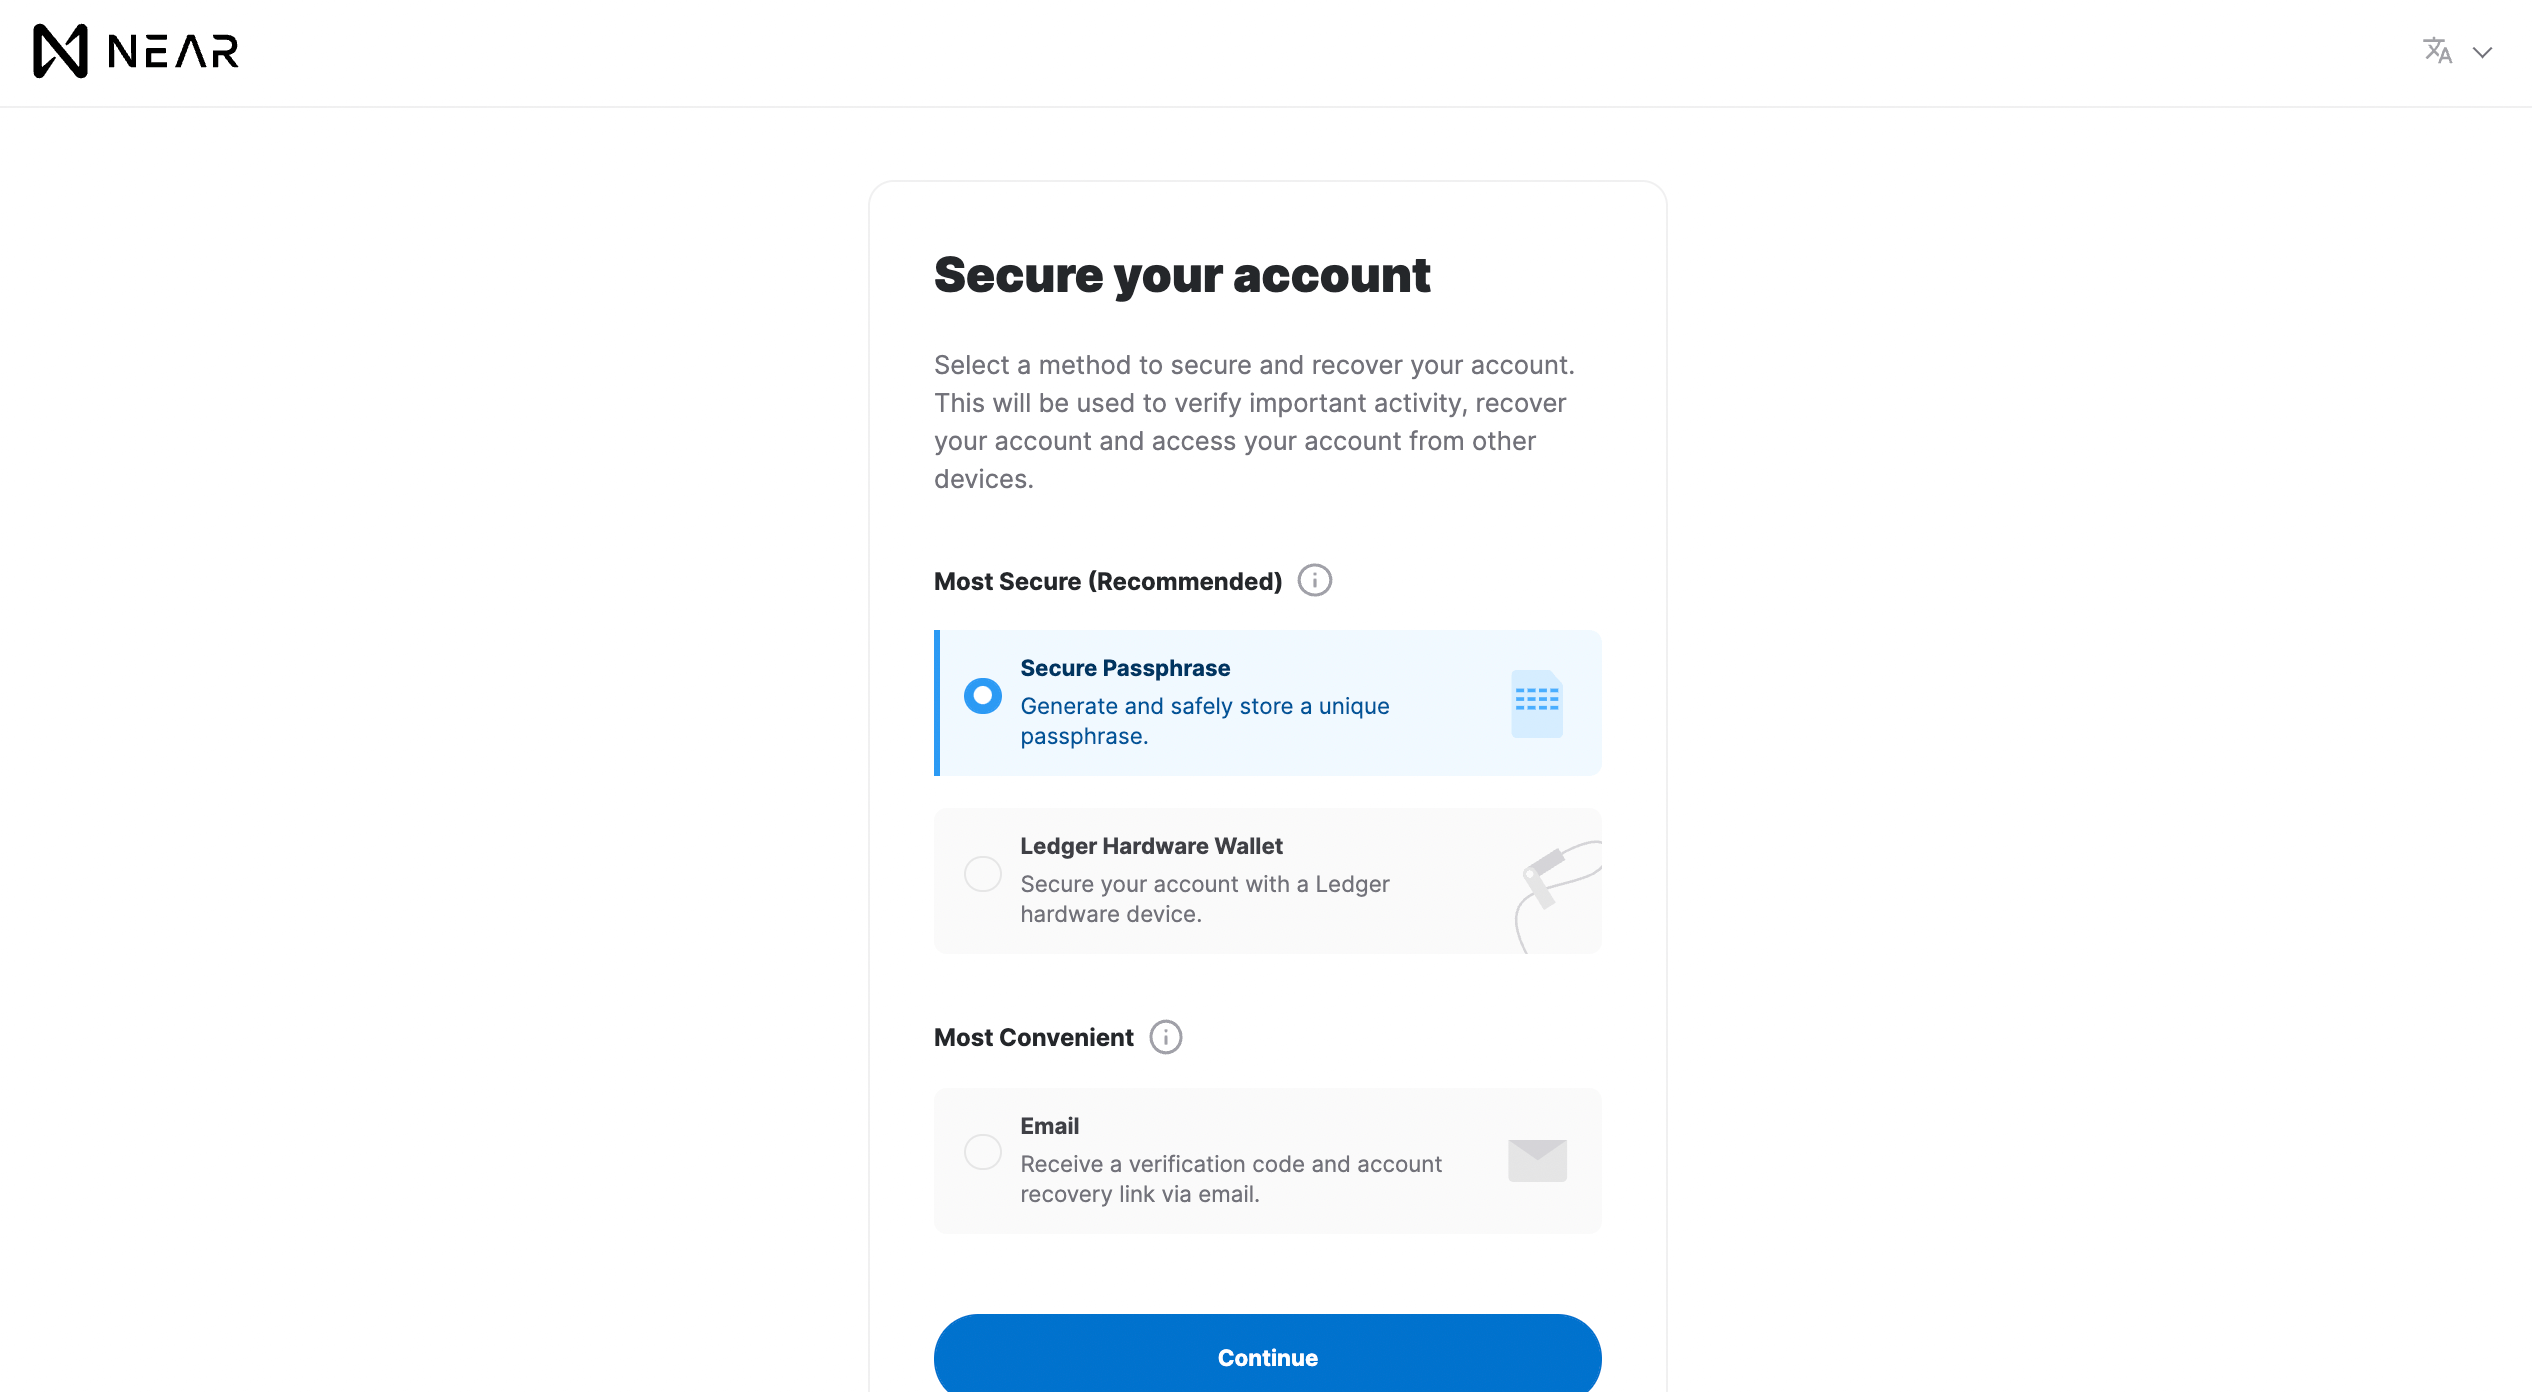 Secure your account